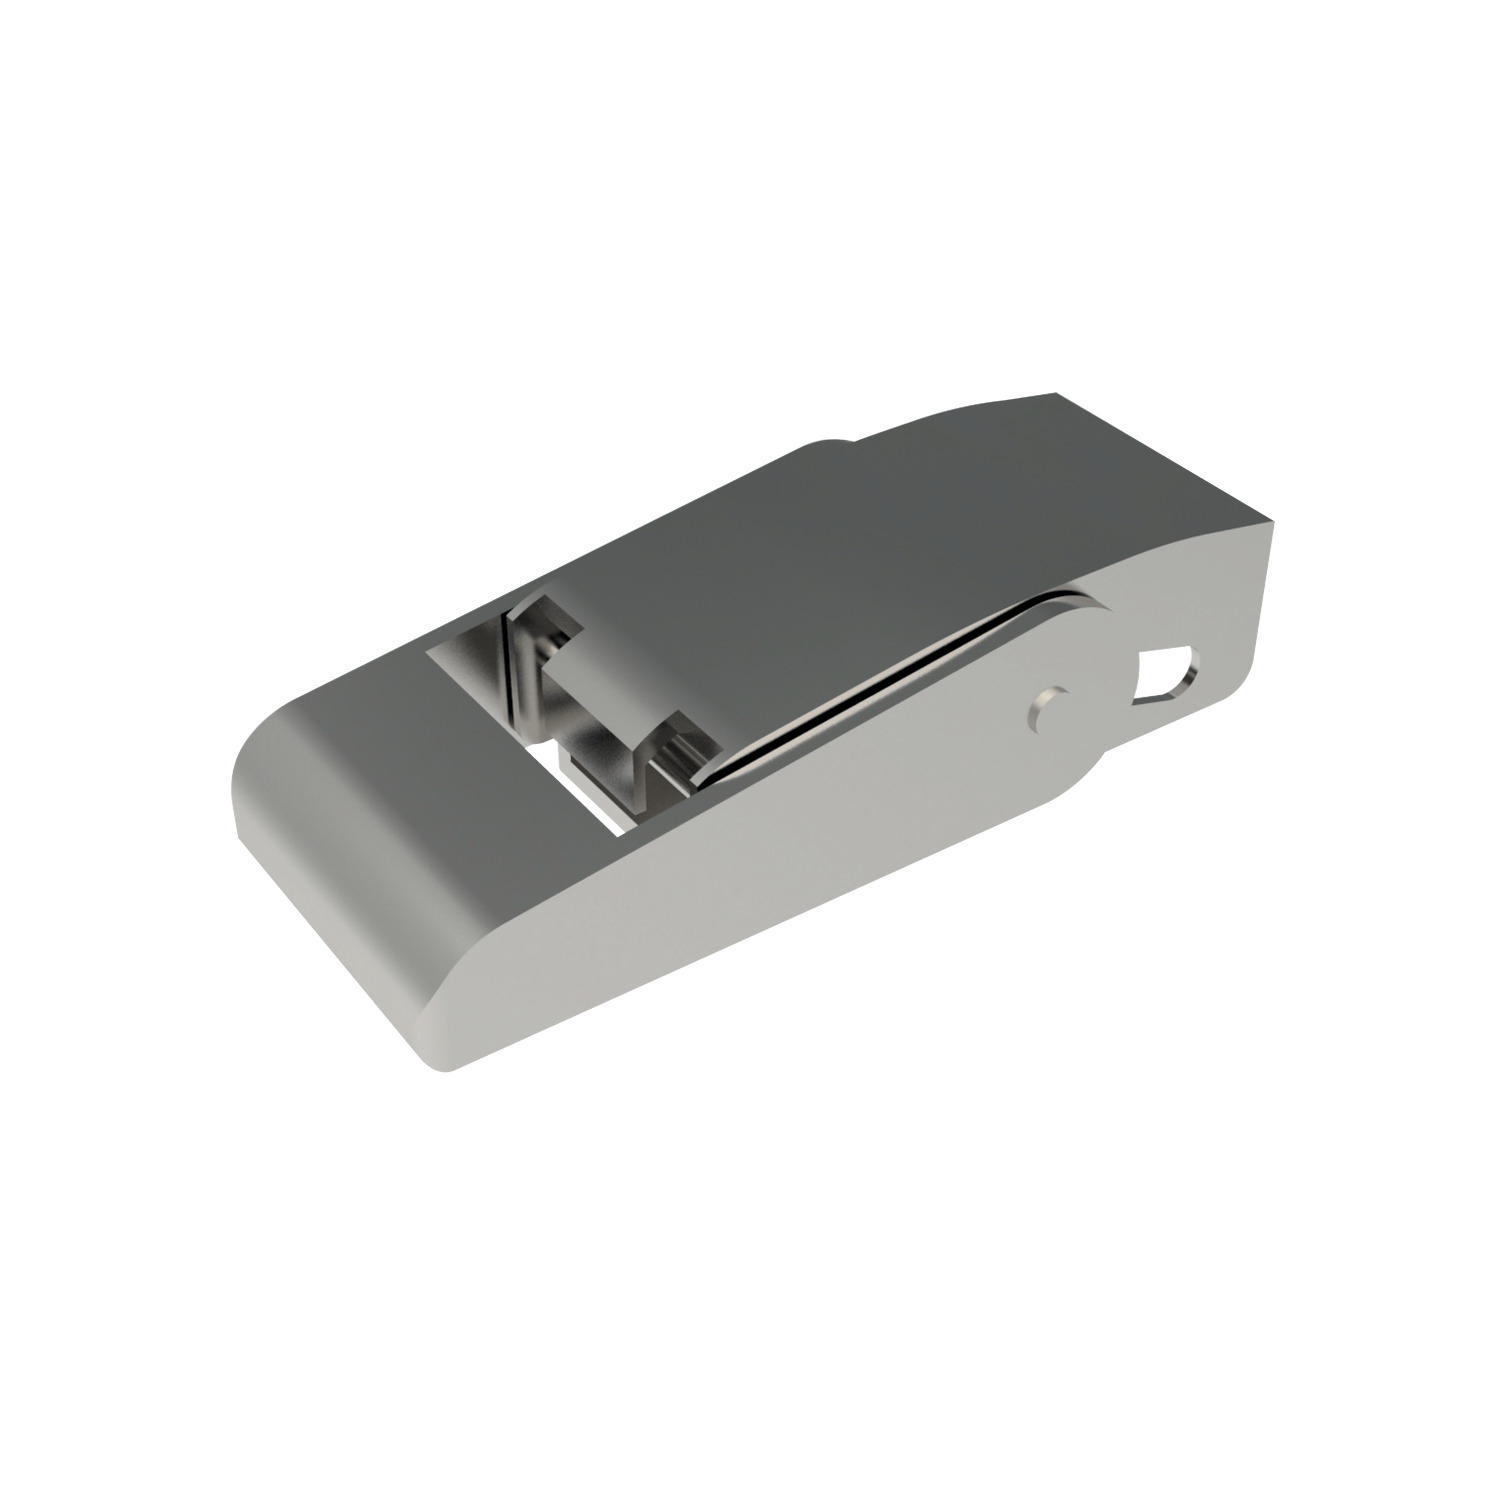 Product J0300, Draw Latches - Spring Loaded stainless steel / 